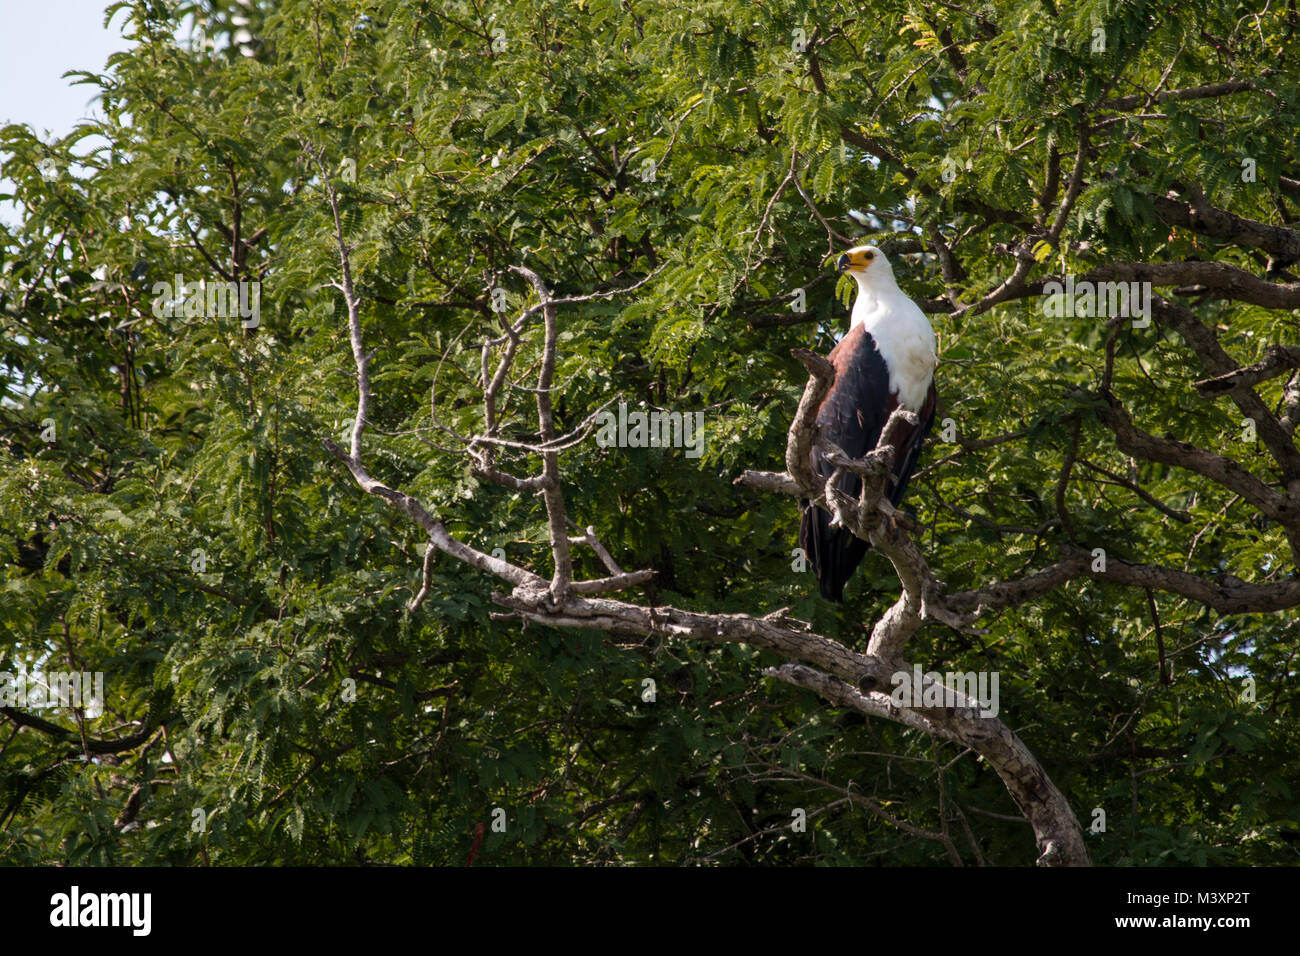 African fish eagle (Haliaeetus vocifer) perched on a tree branch in Murchison Falls National Park, Uganda. Stock Photo